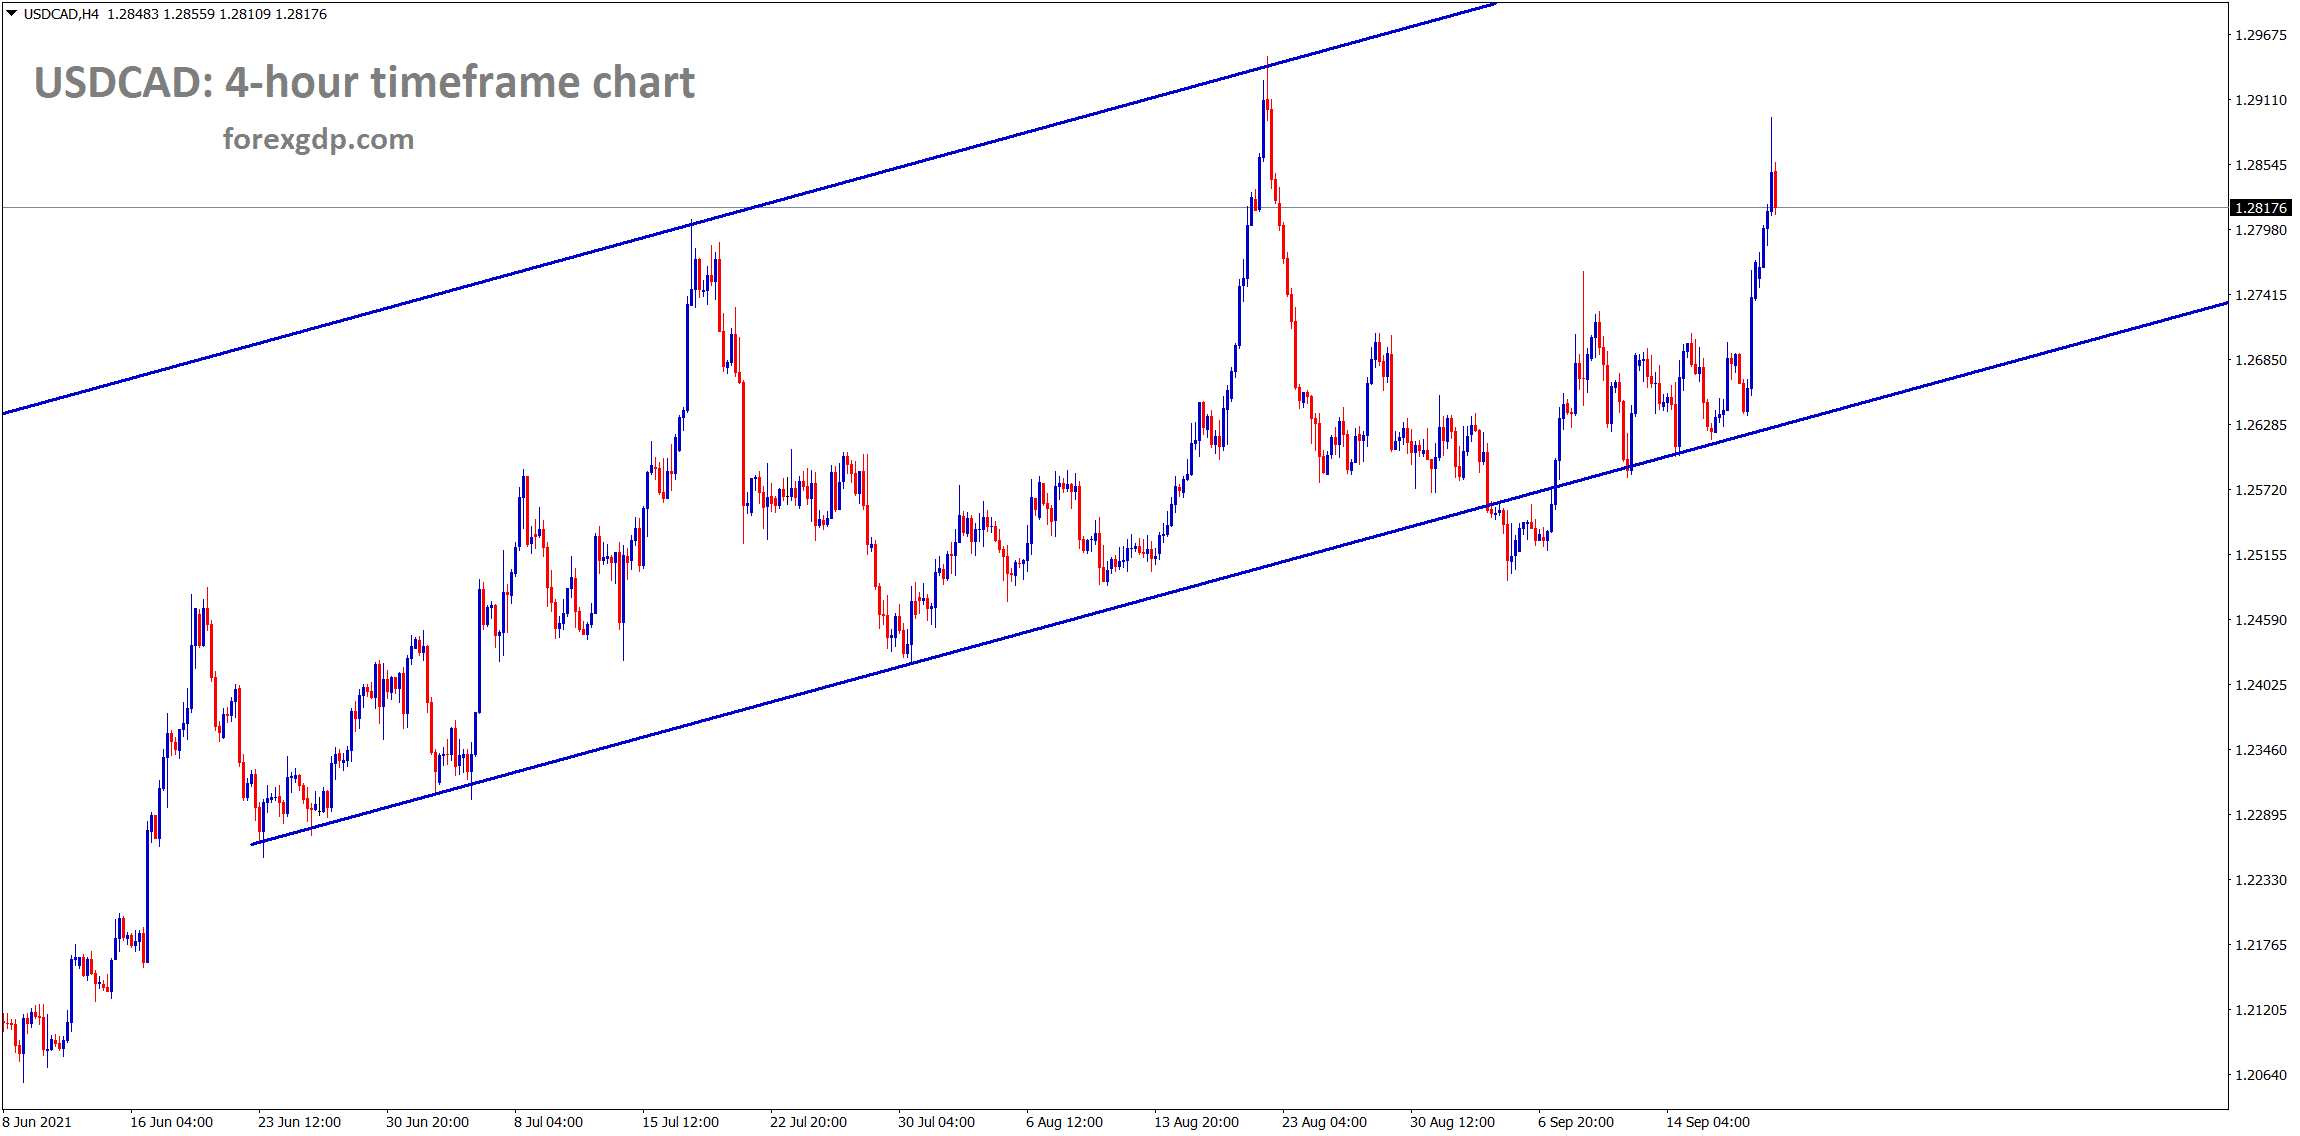 USDCAD is moving in an uptrend channel line